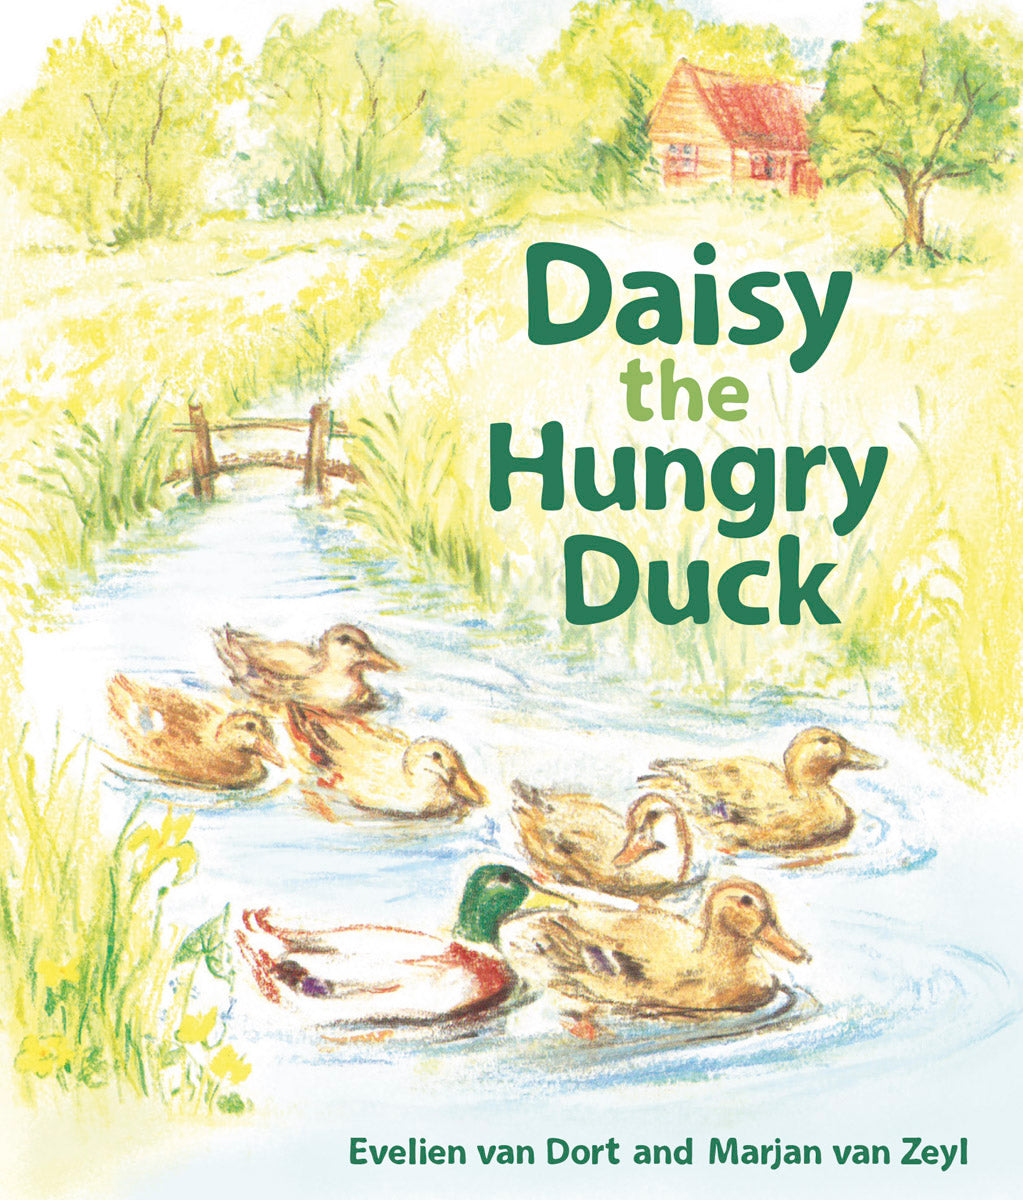 Daisy the Hungry Duck by Evelien van Dort